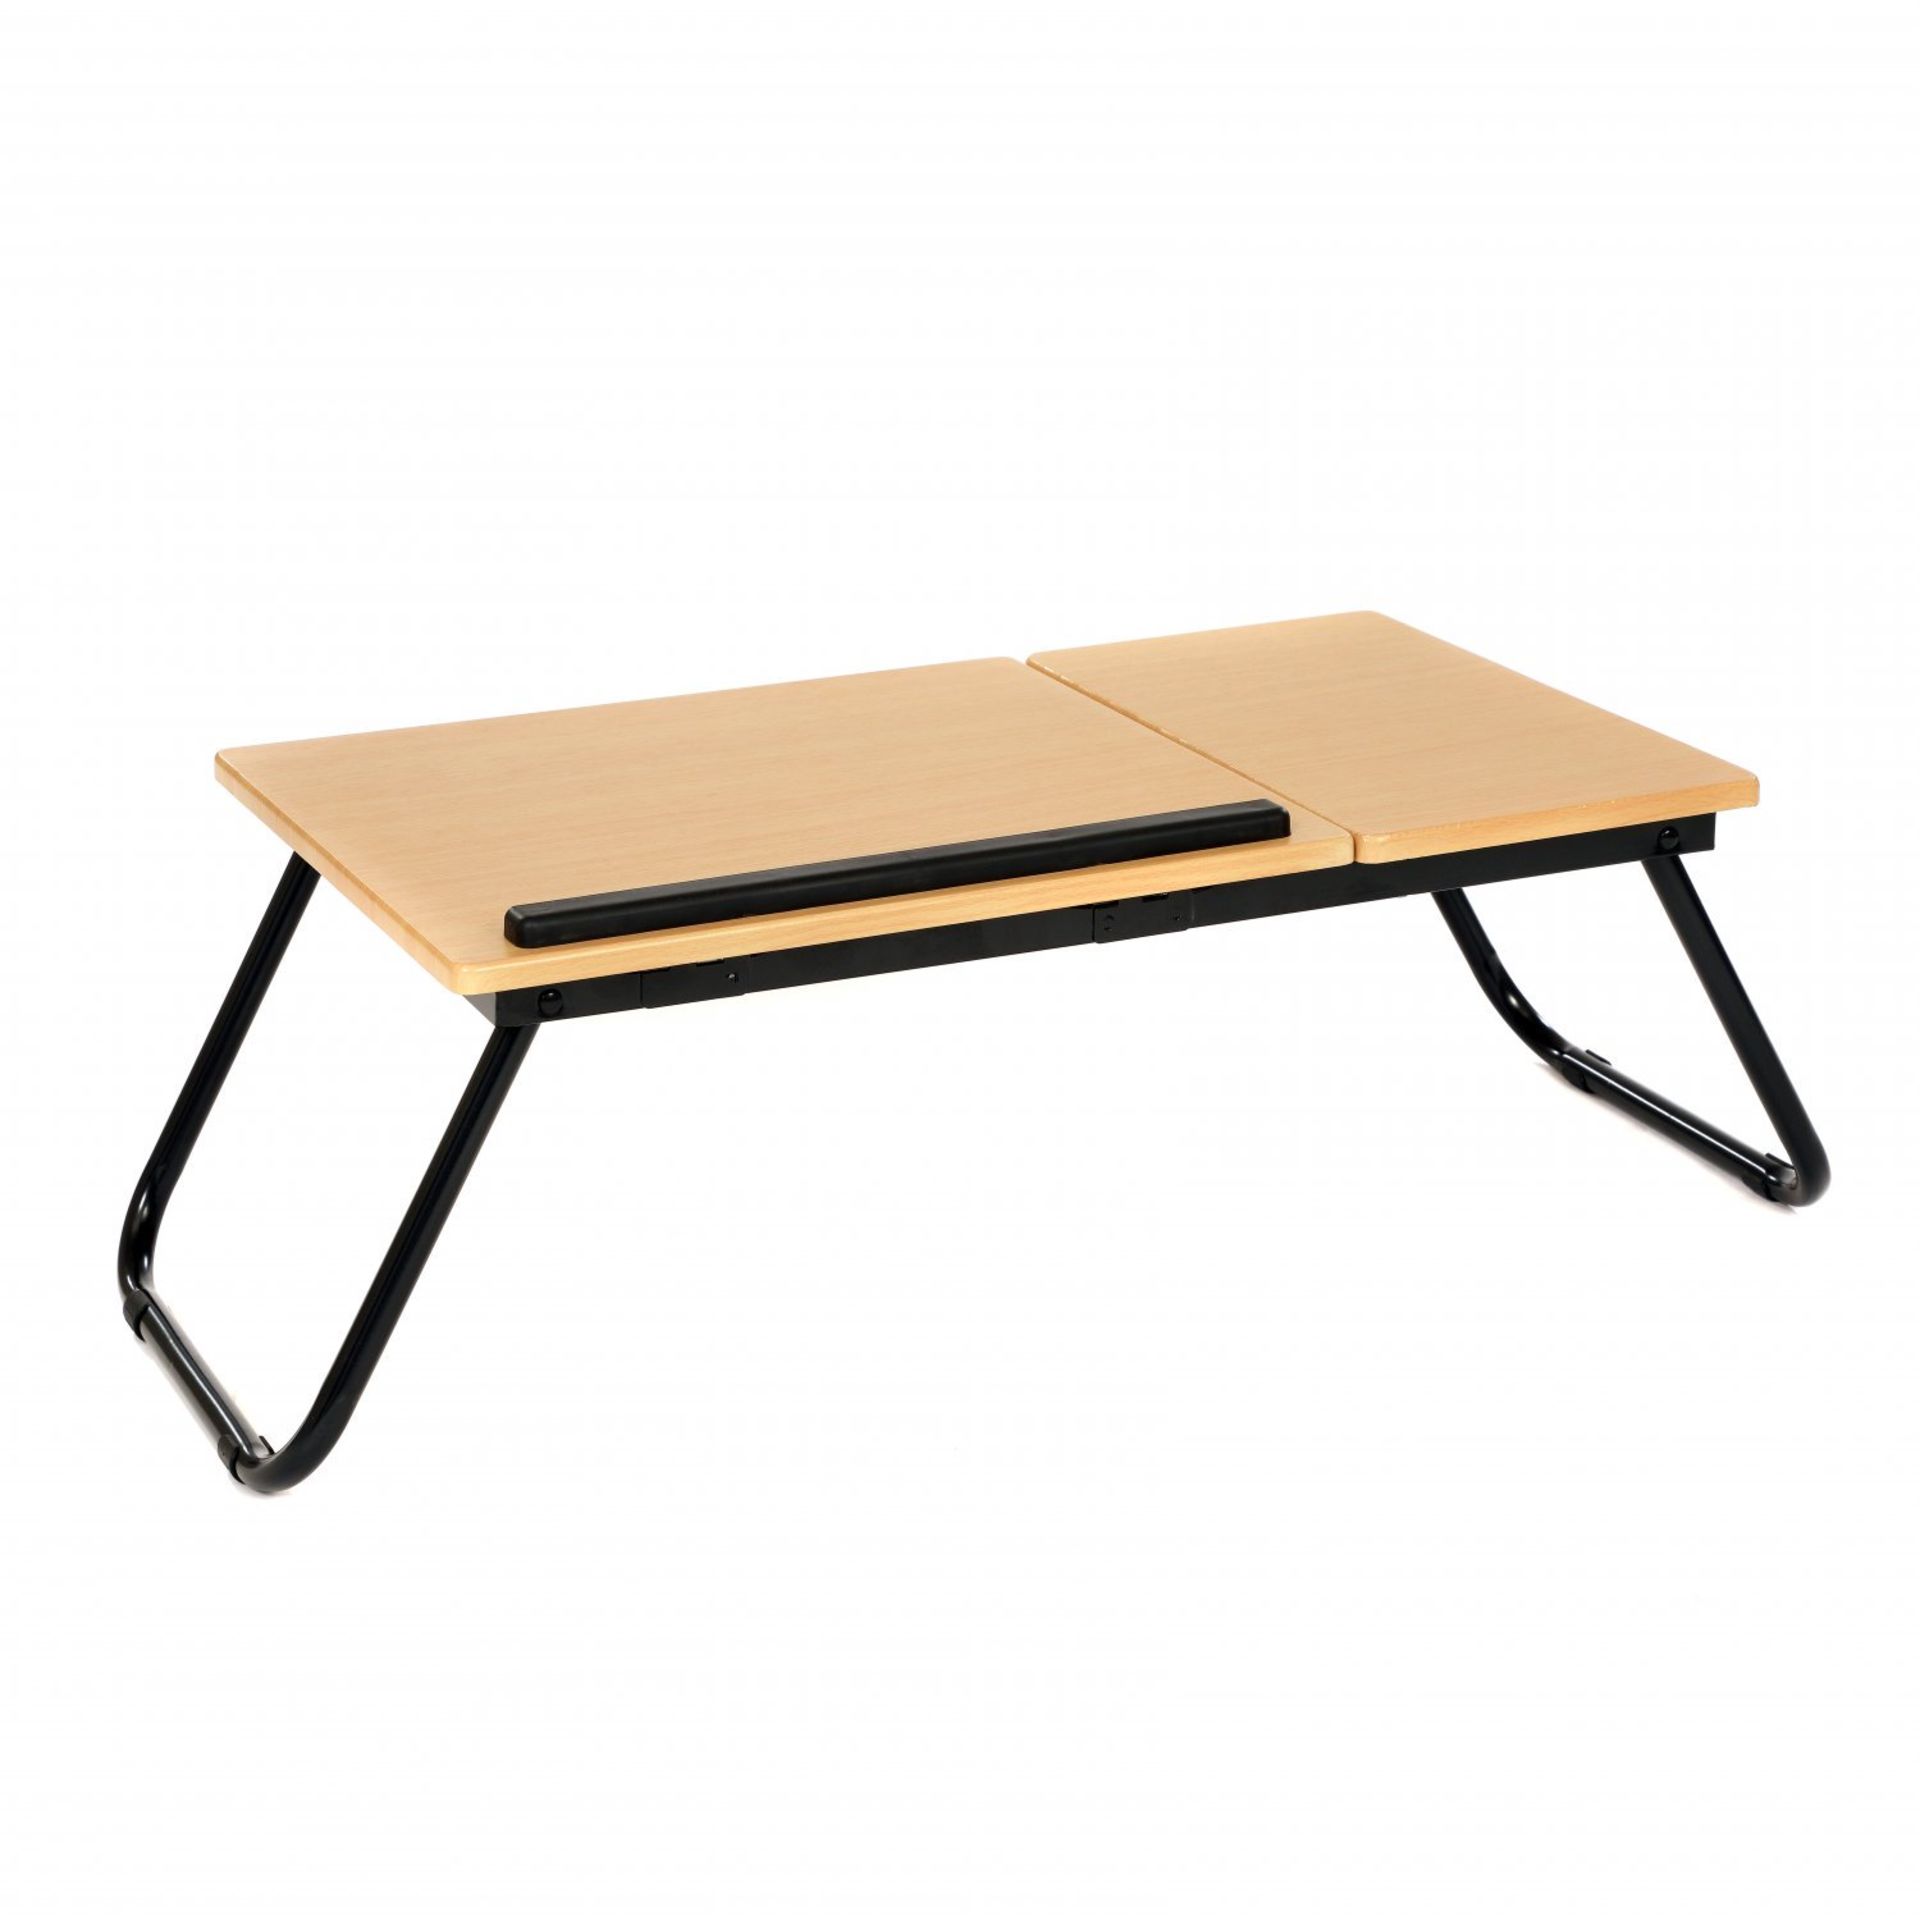 (KK89) Portable Folding Laptop Notepad Tablet Computer Table Desk Stand The folding table ... - Image 2 of 2